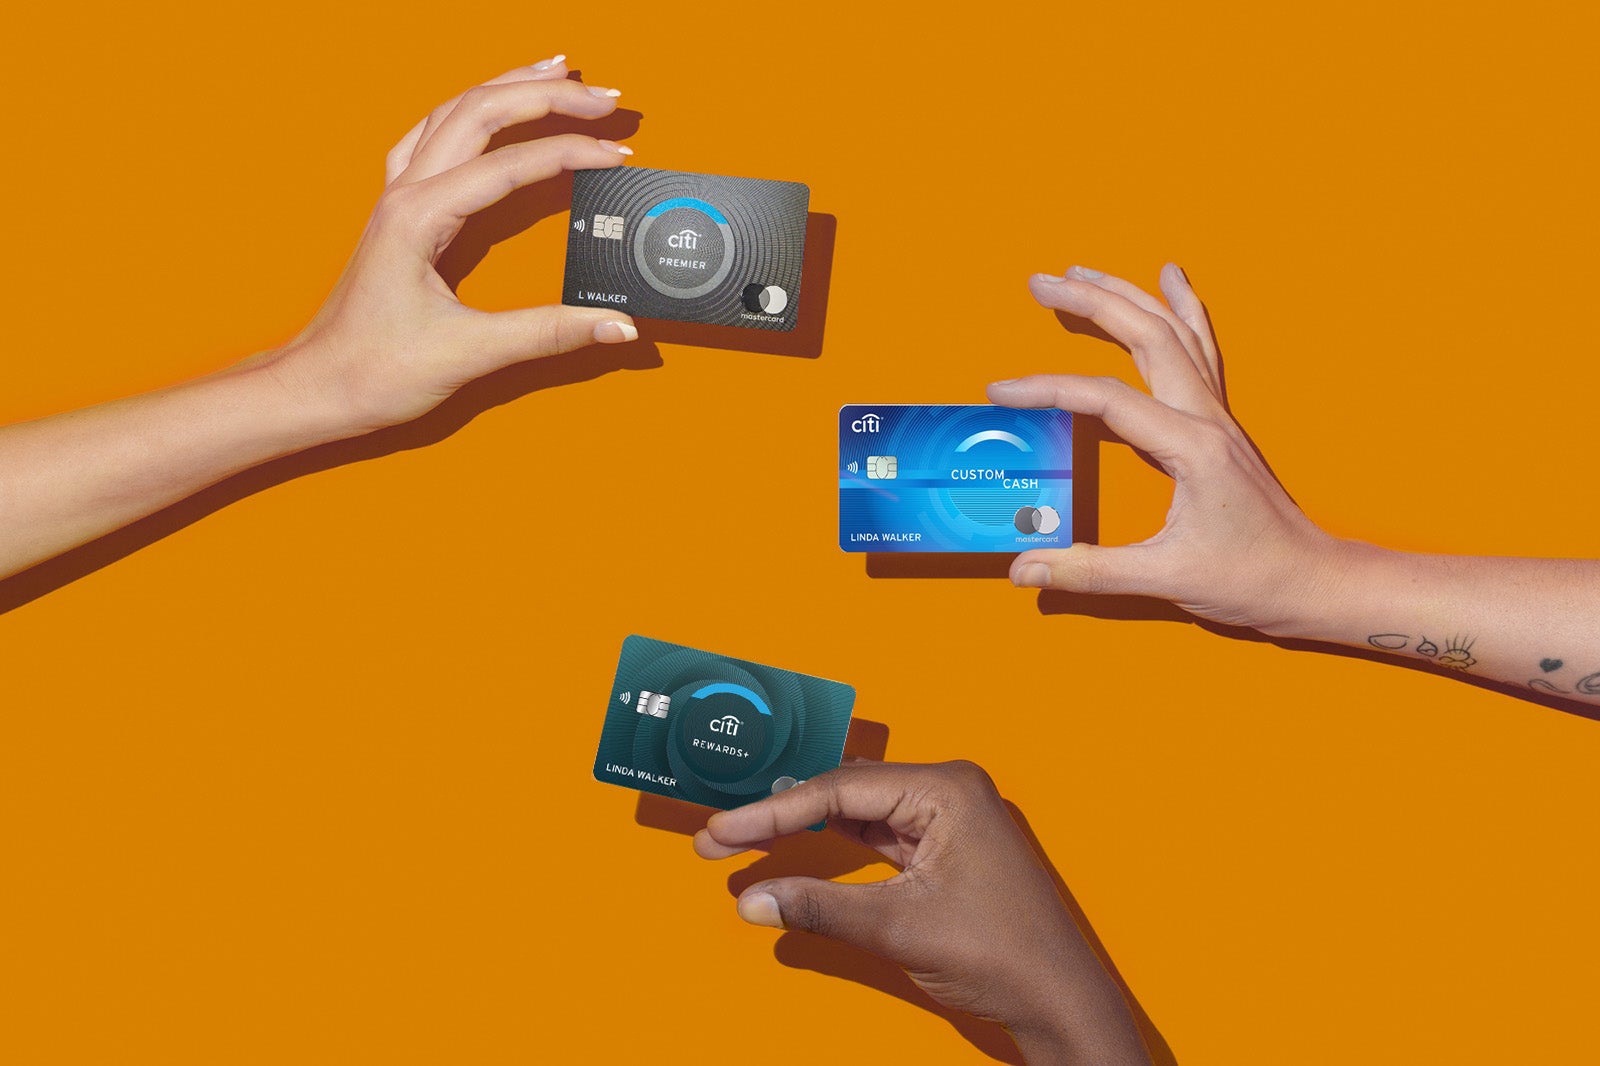 hands hold multiple Citi credit cards